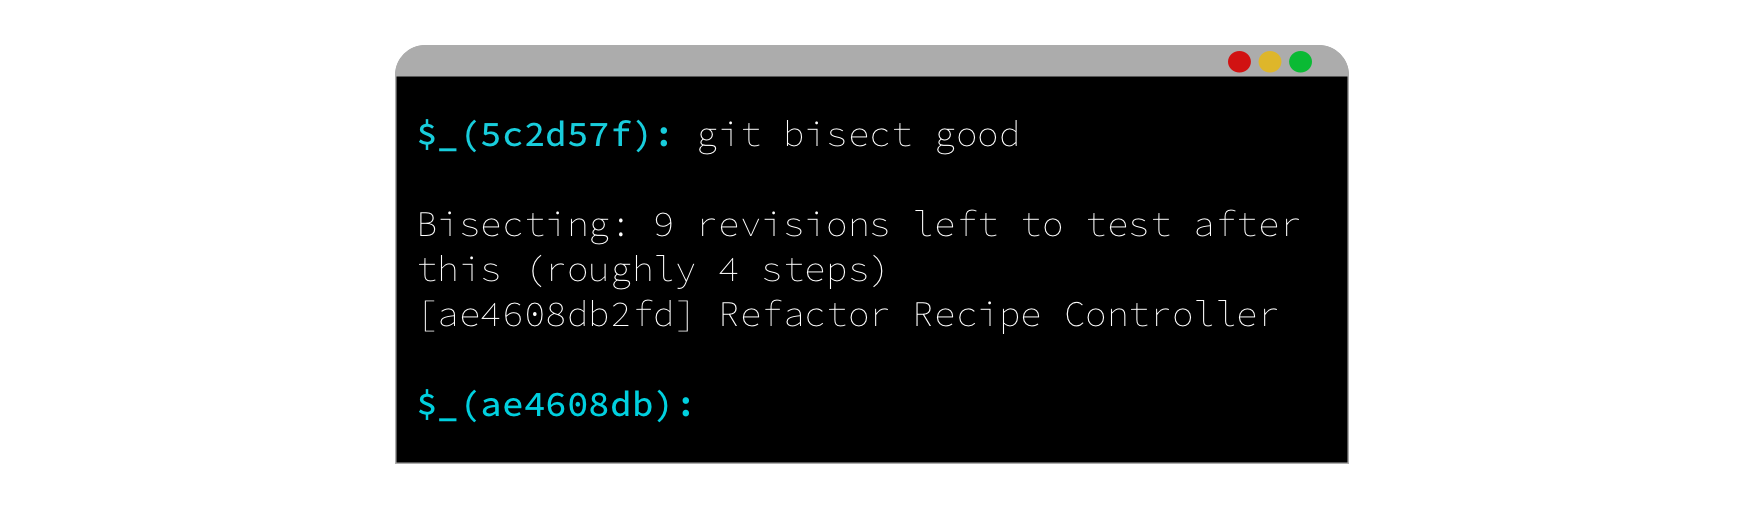 cli_bisect_step.png